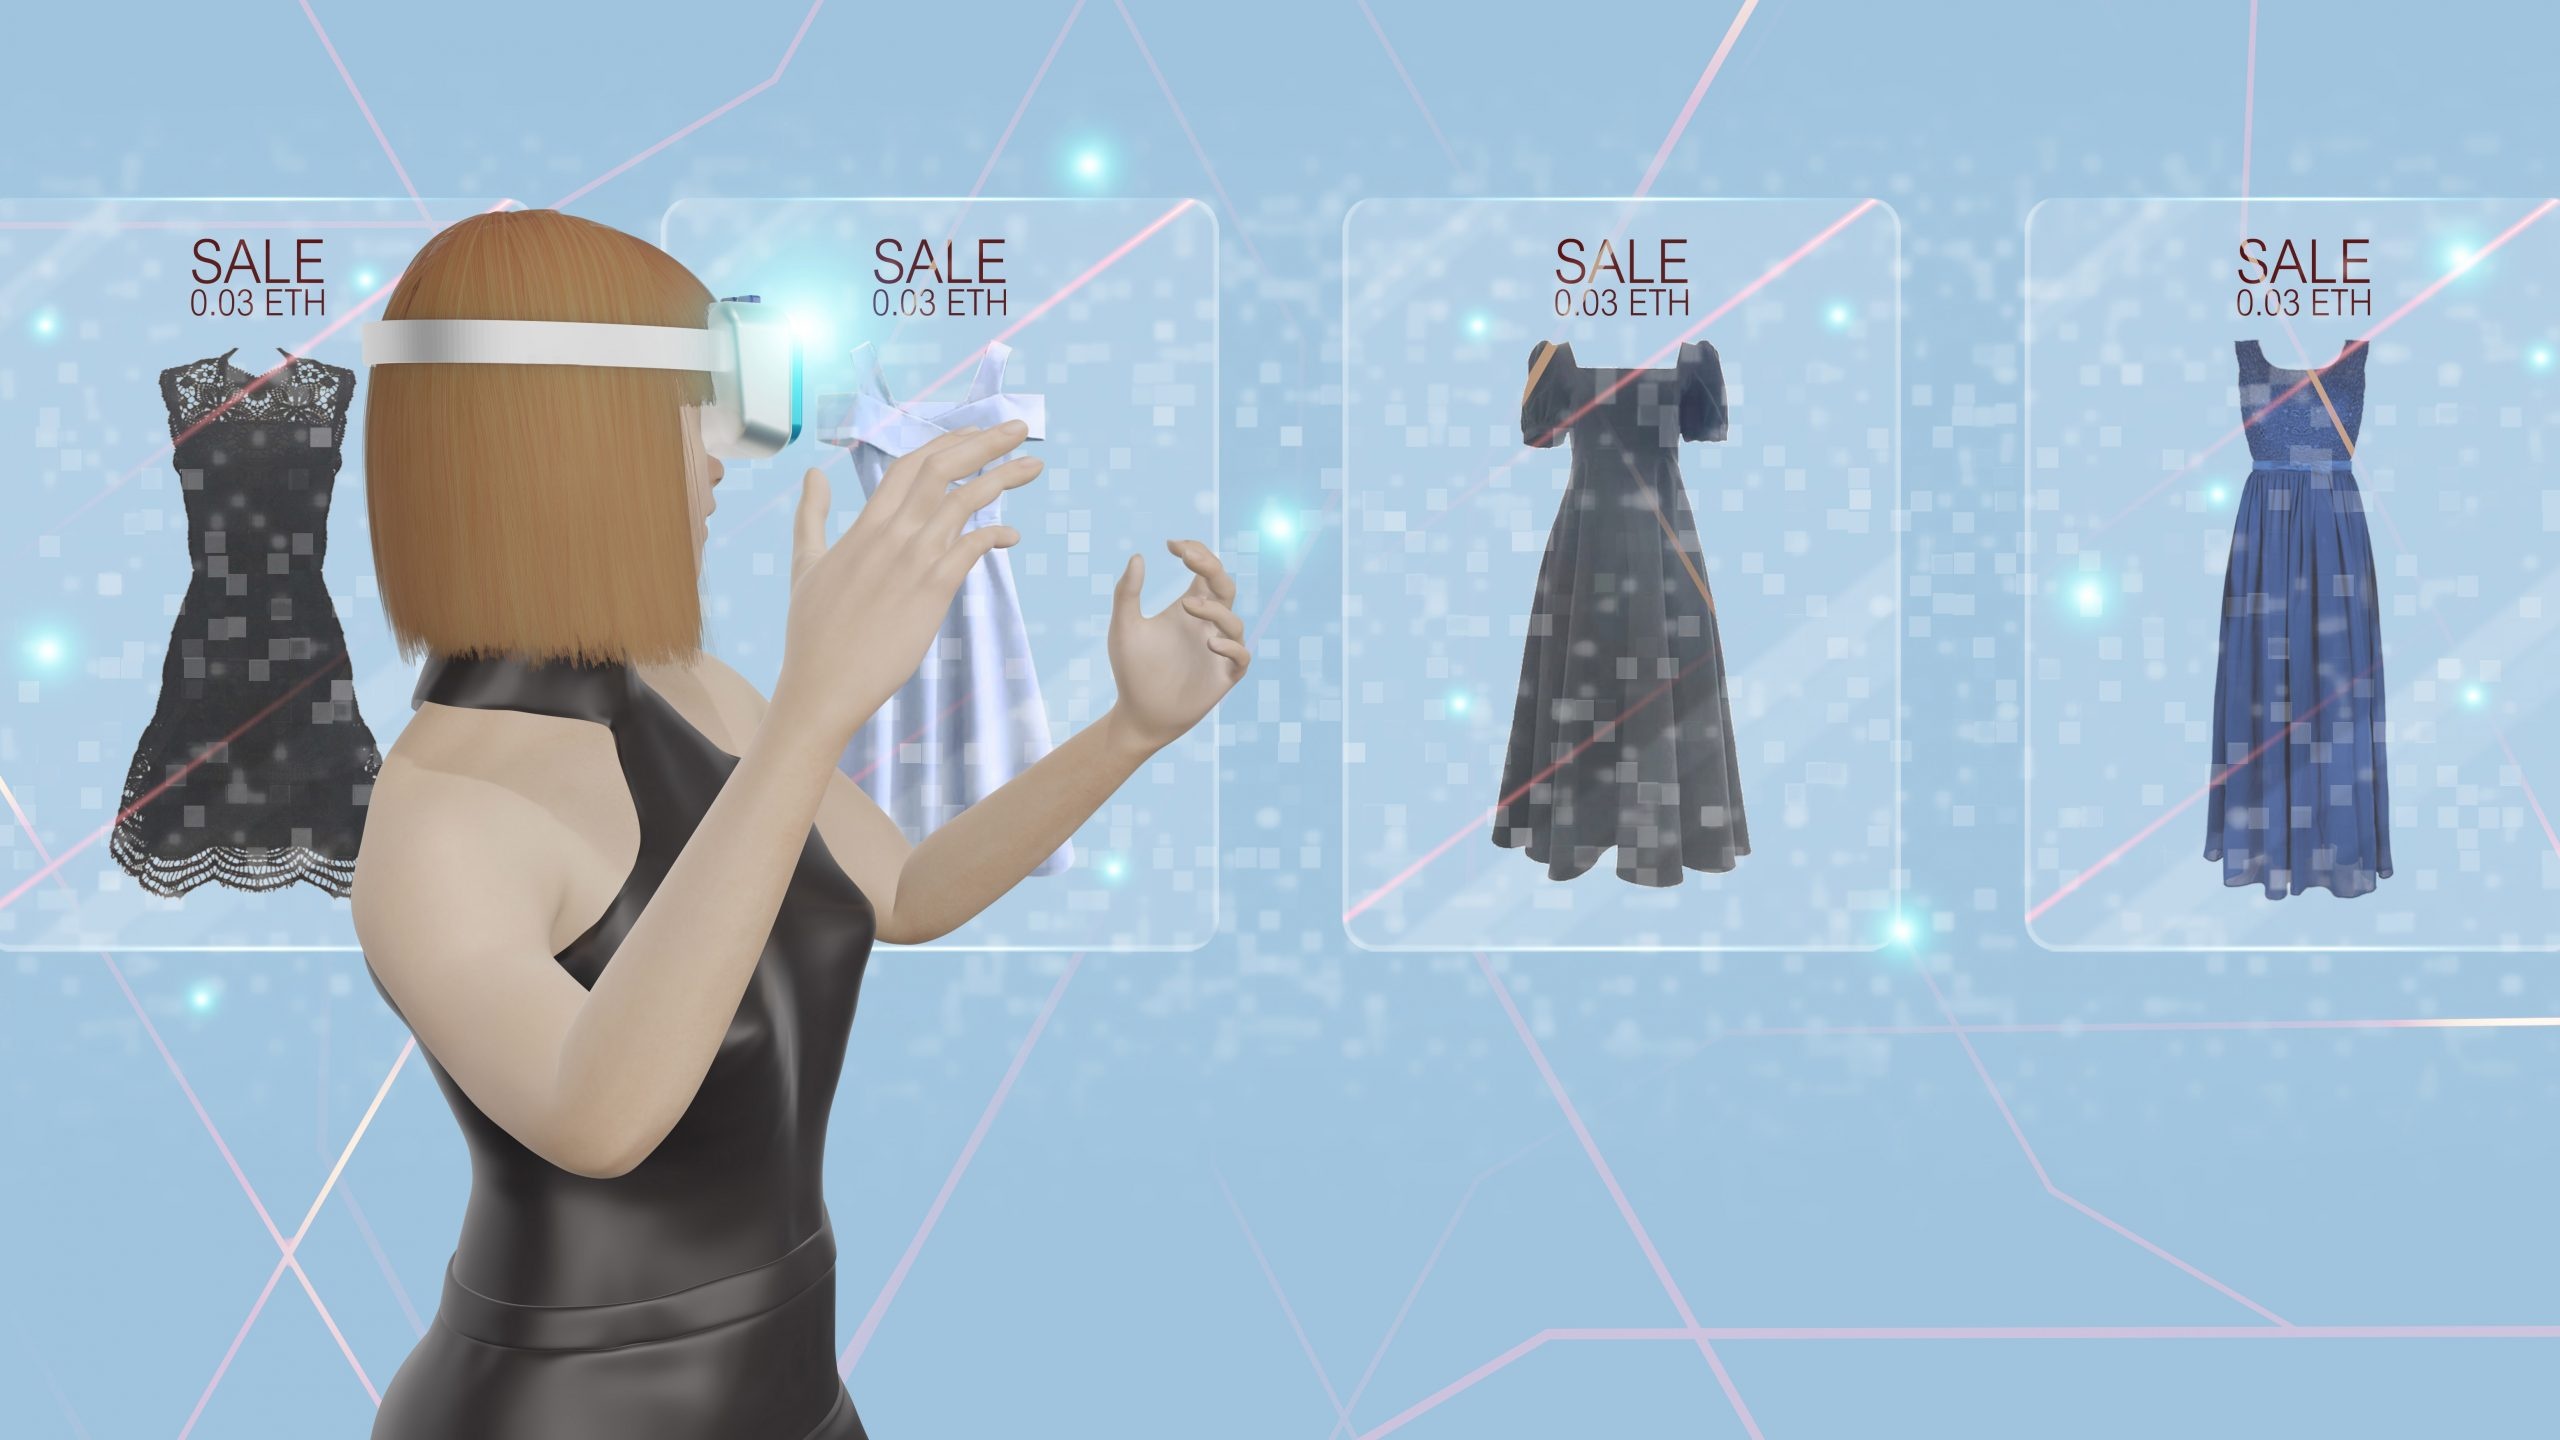 To celebrate the annual 11.11 shopping festival, Alibaba is banking on the Chinaverse with its new interactive retail space called “Metaverse." Photo: Shutterstock